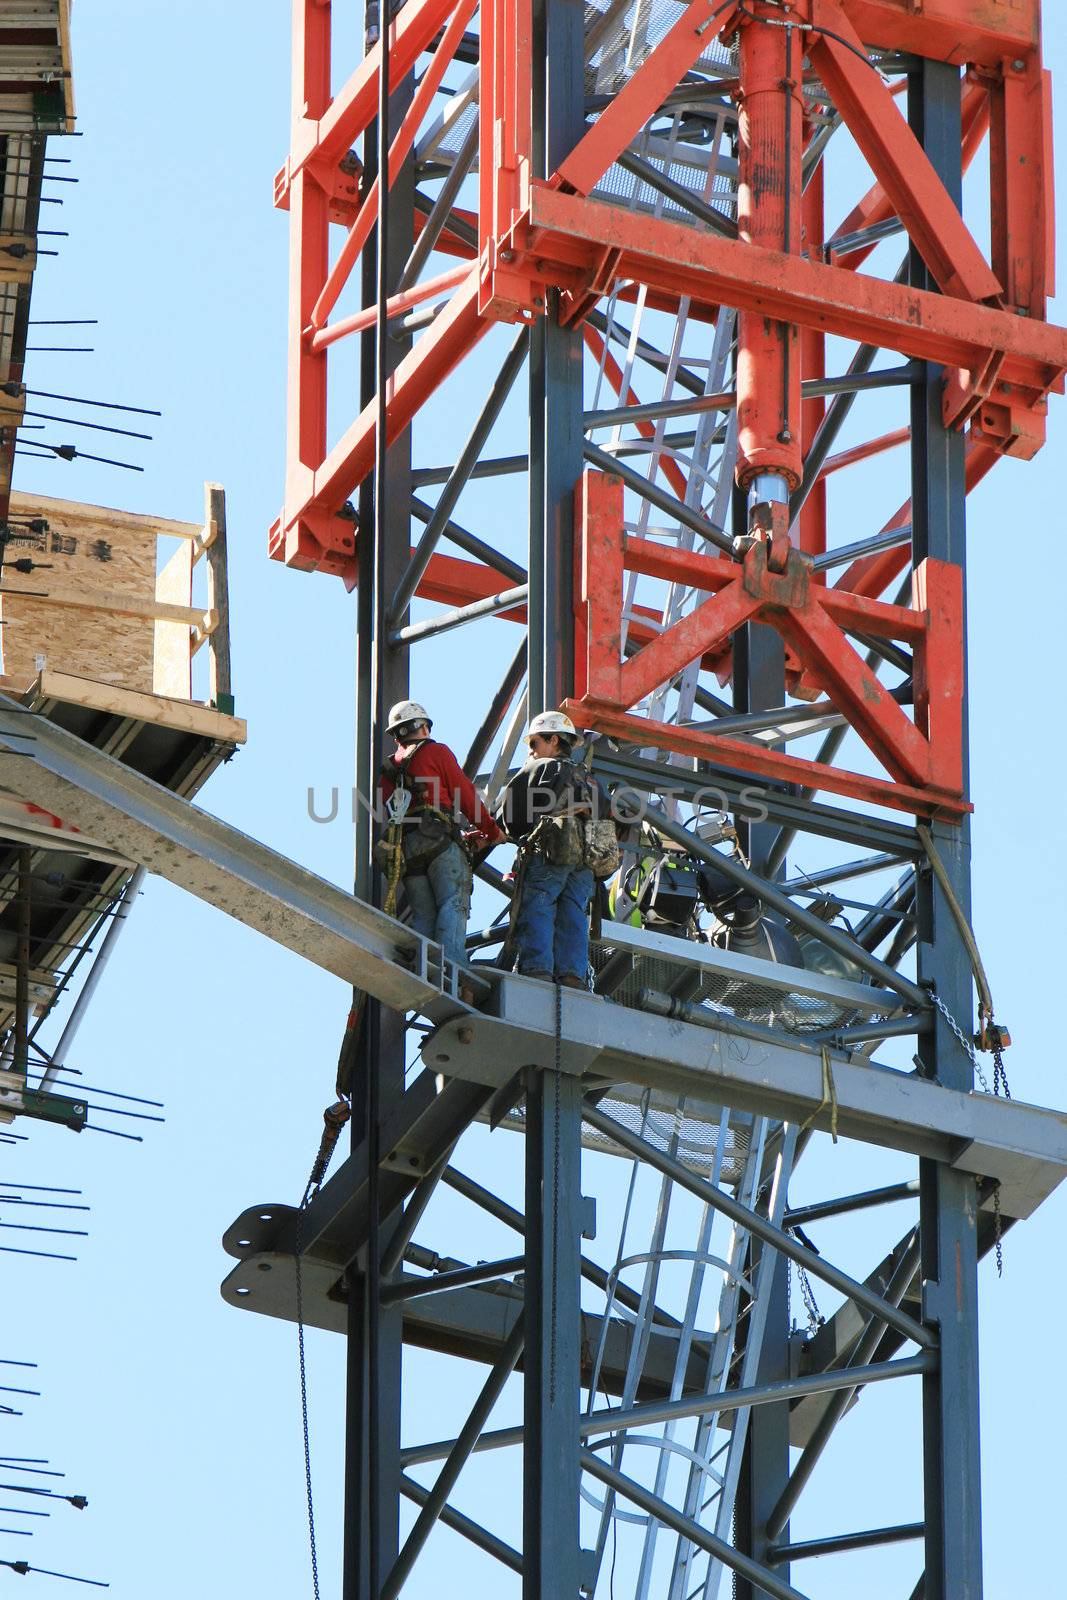 Two construction workers are tethered to the side of a crane that is being erected